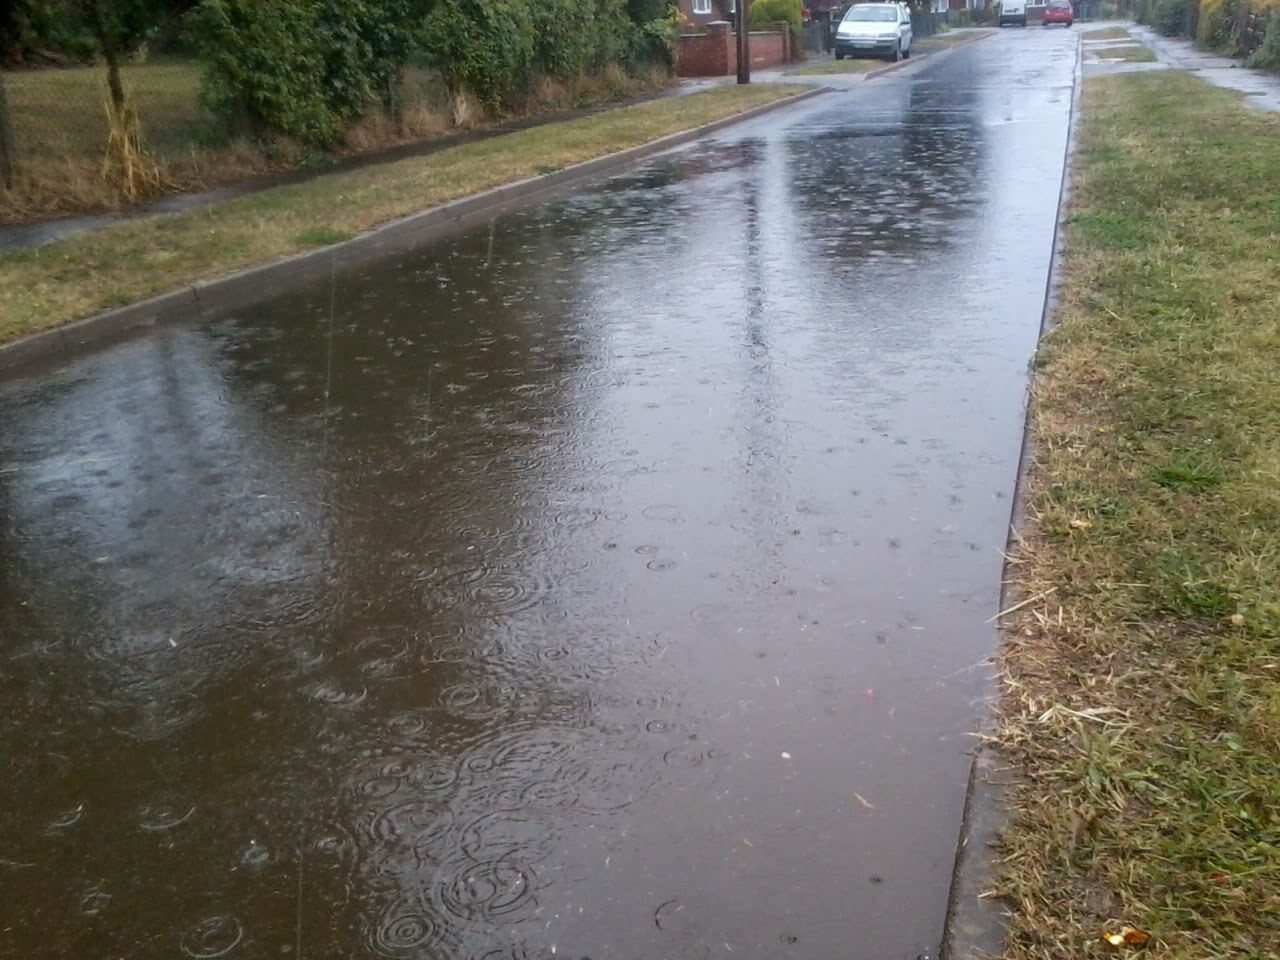 Flooded streets of Barrowby